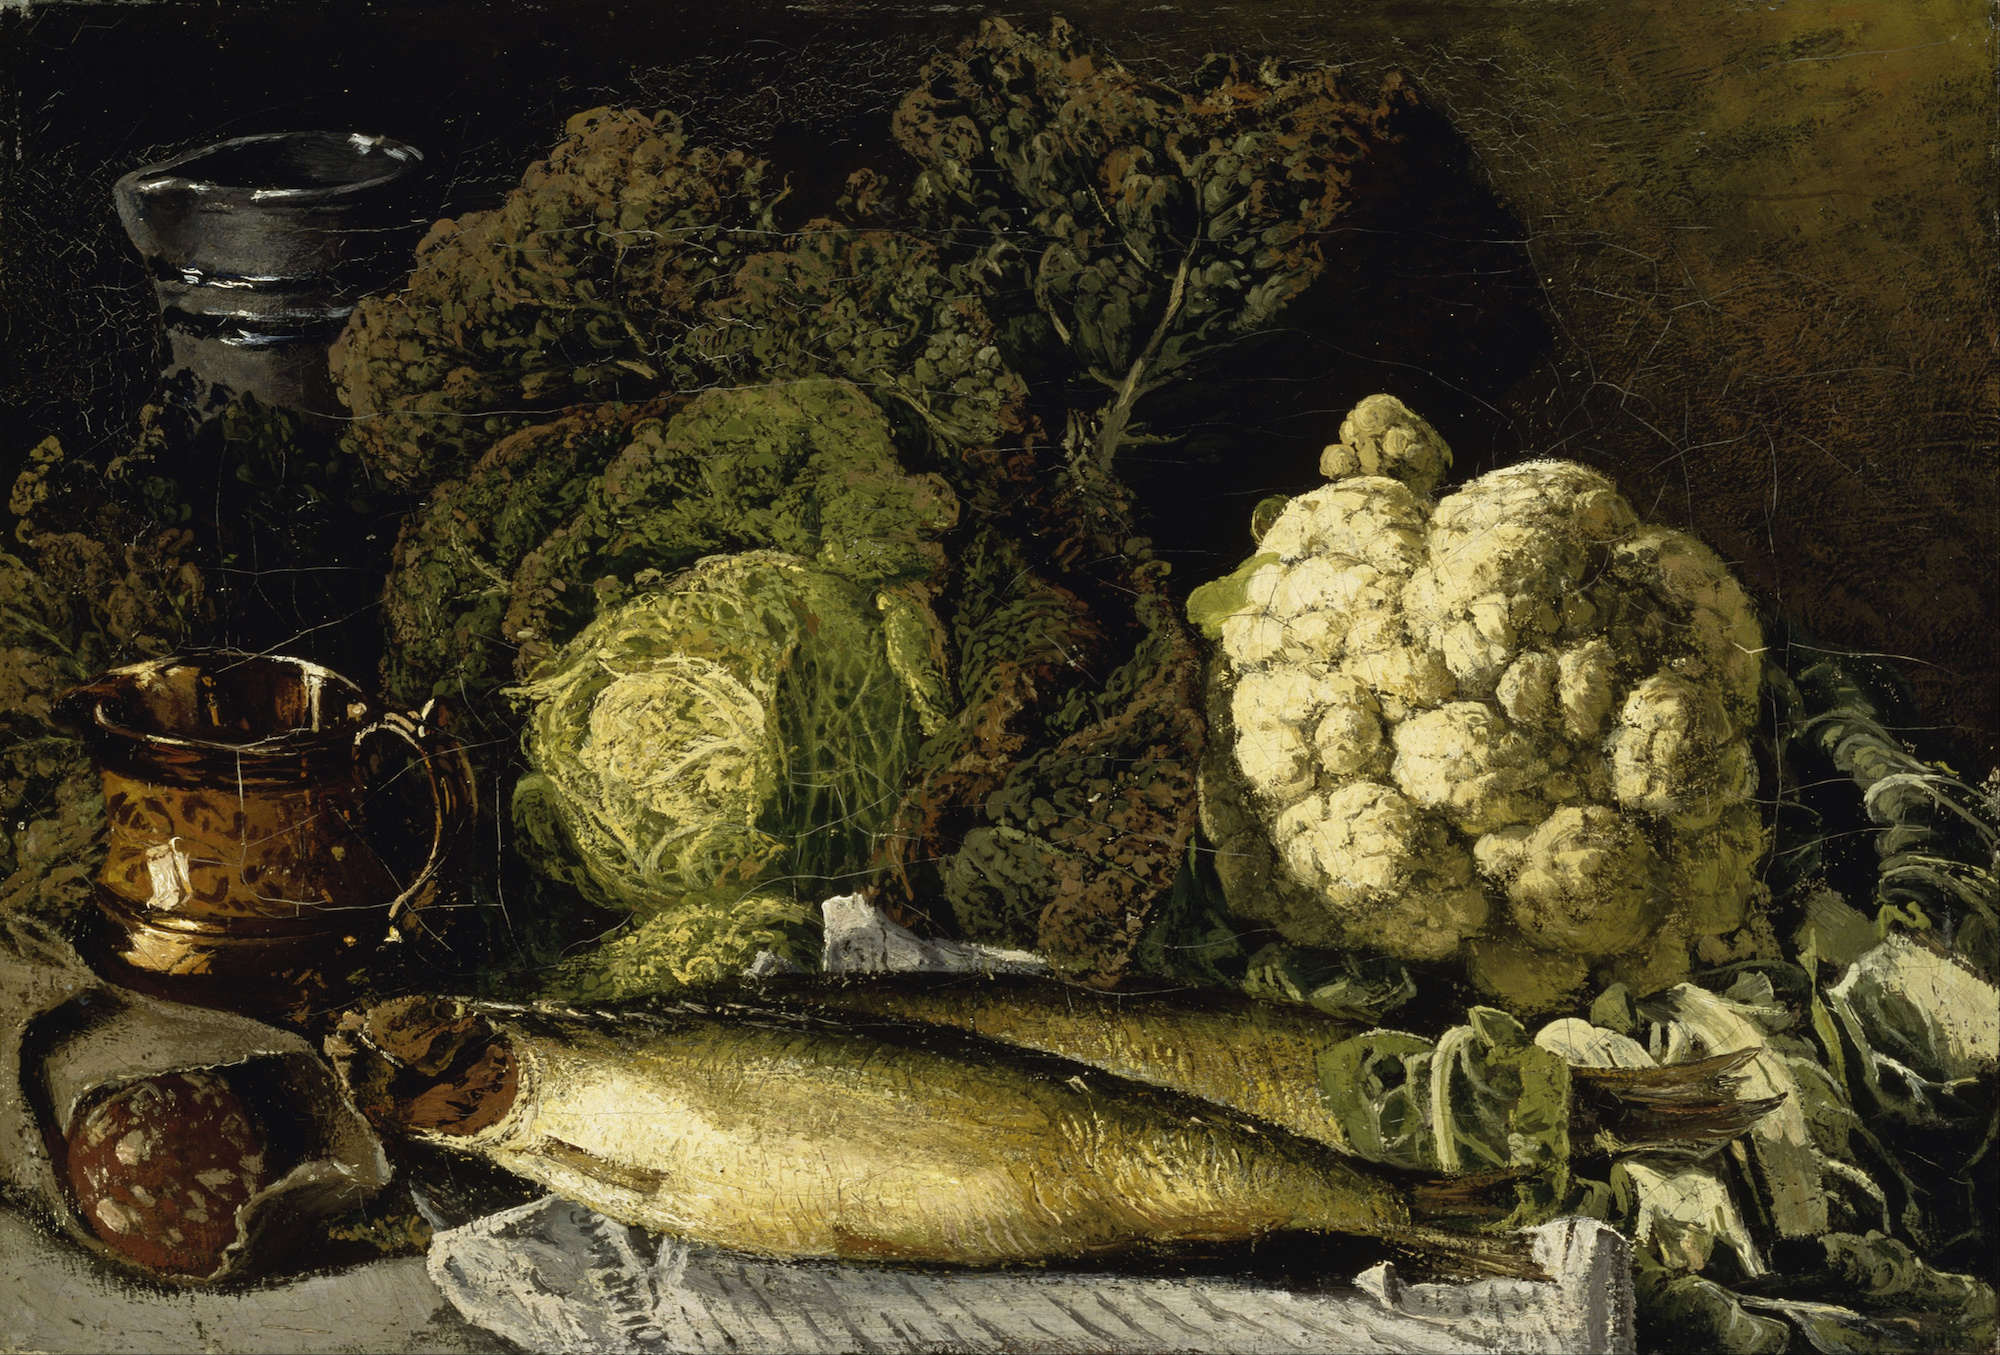 Still Life with Vegetables and Fish by Fanny Churberg - 1876 - 56.5 x 38 cm Finnish National Gallery